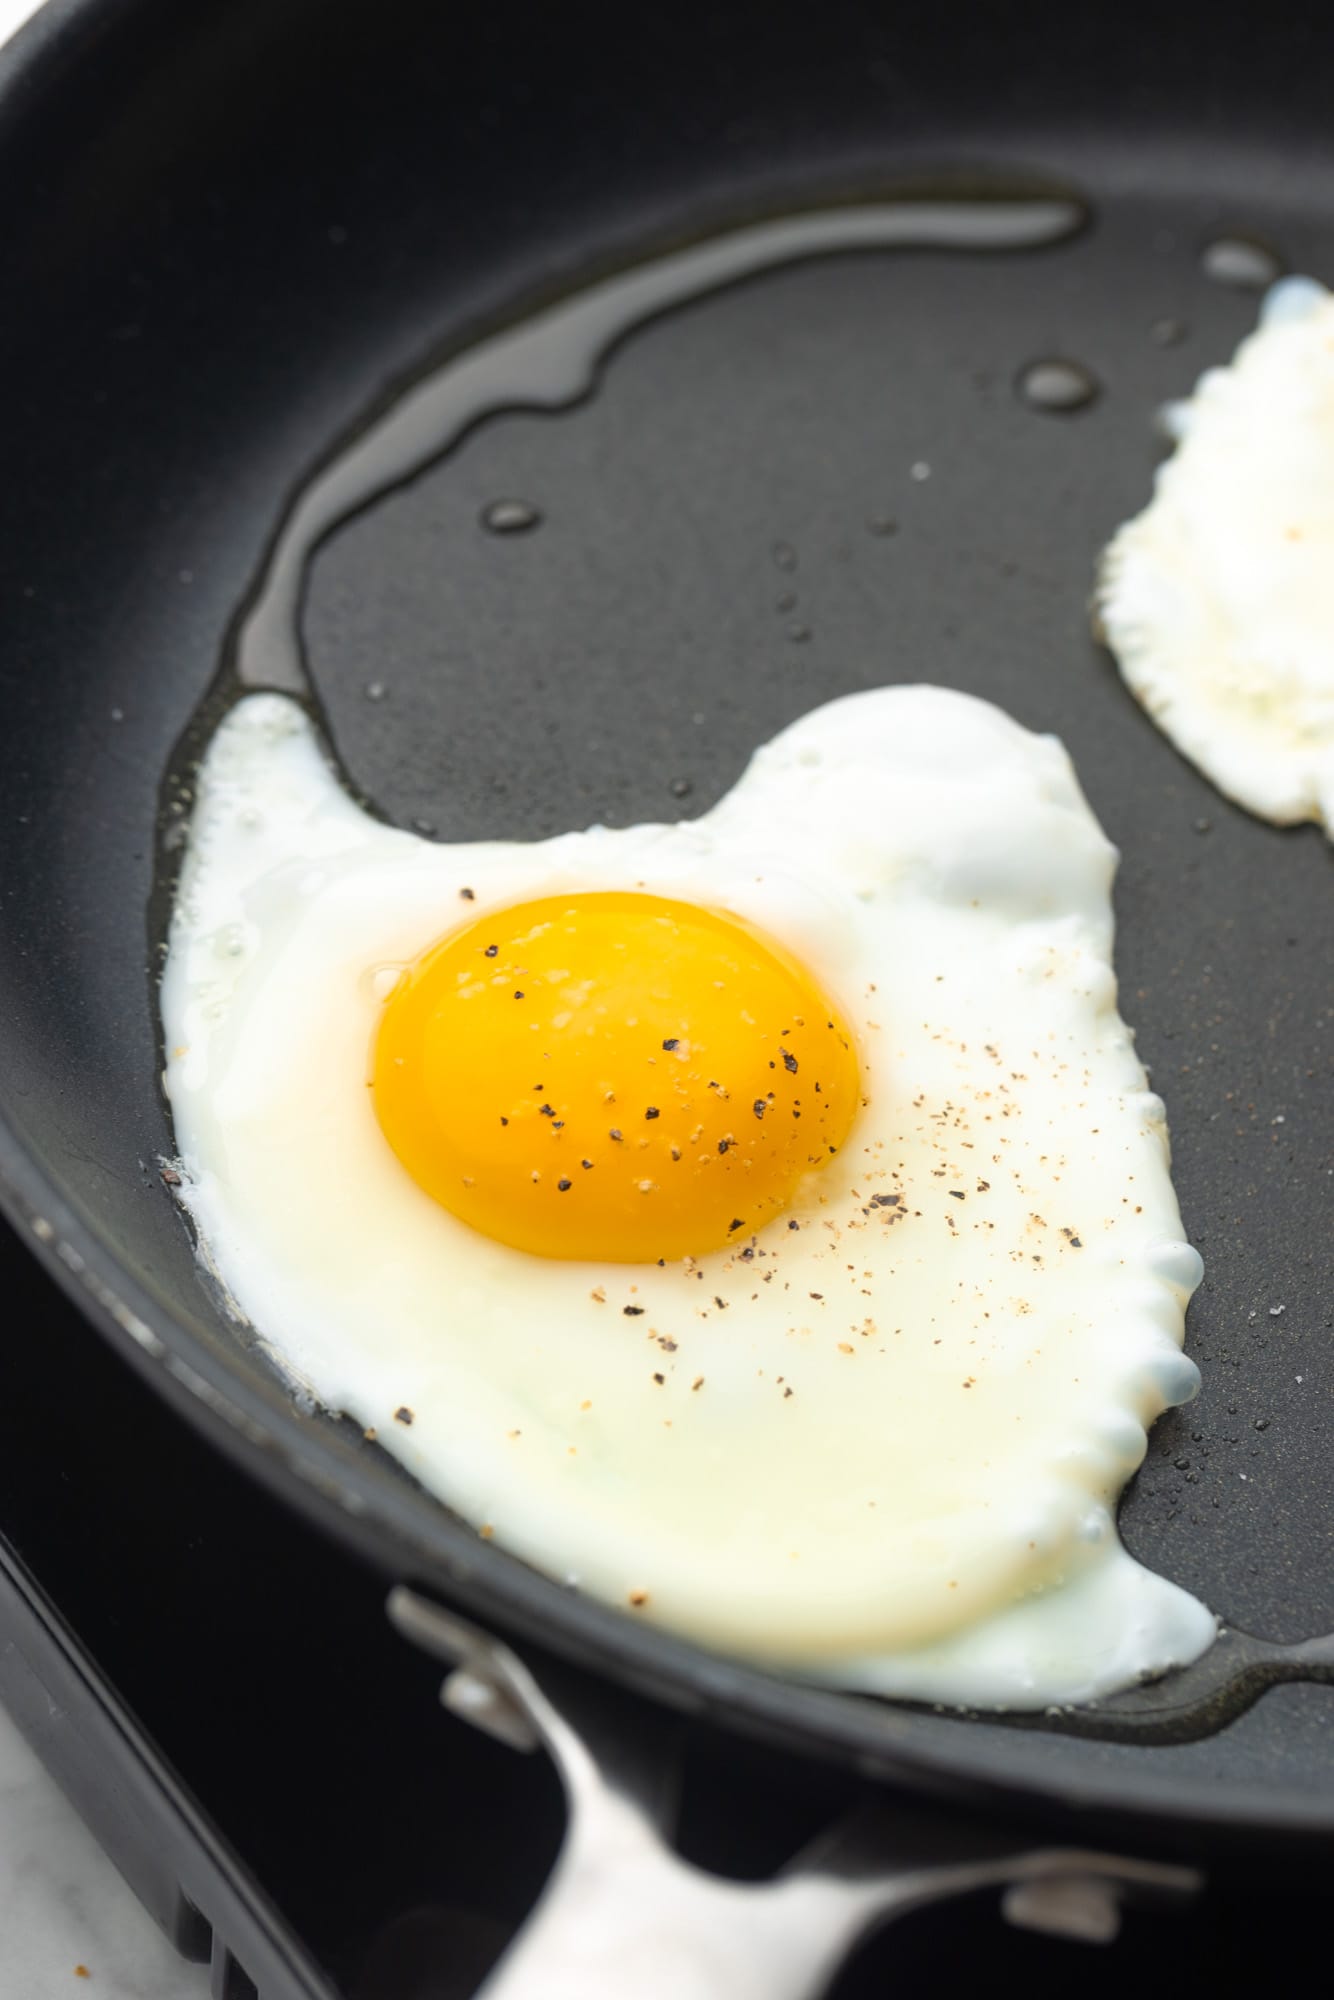 a fried egg cooking in a nonstick pan with oil.